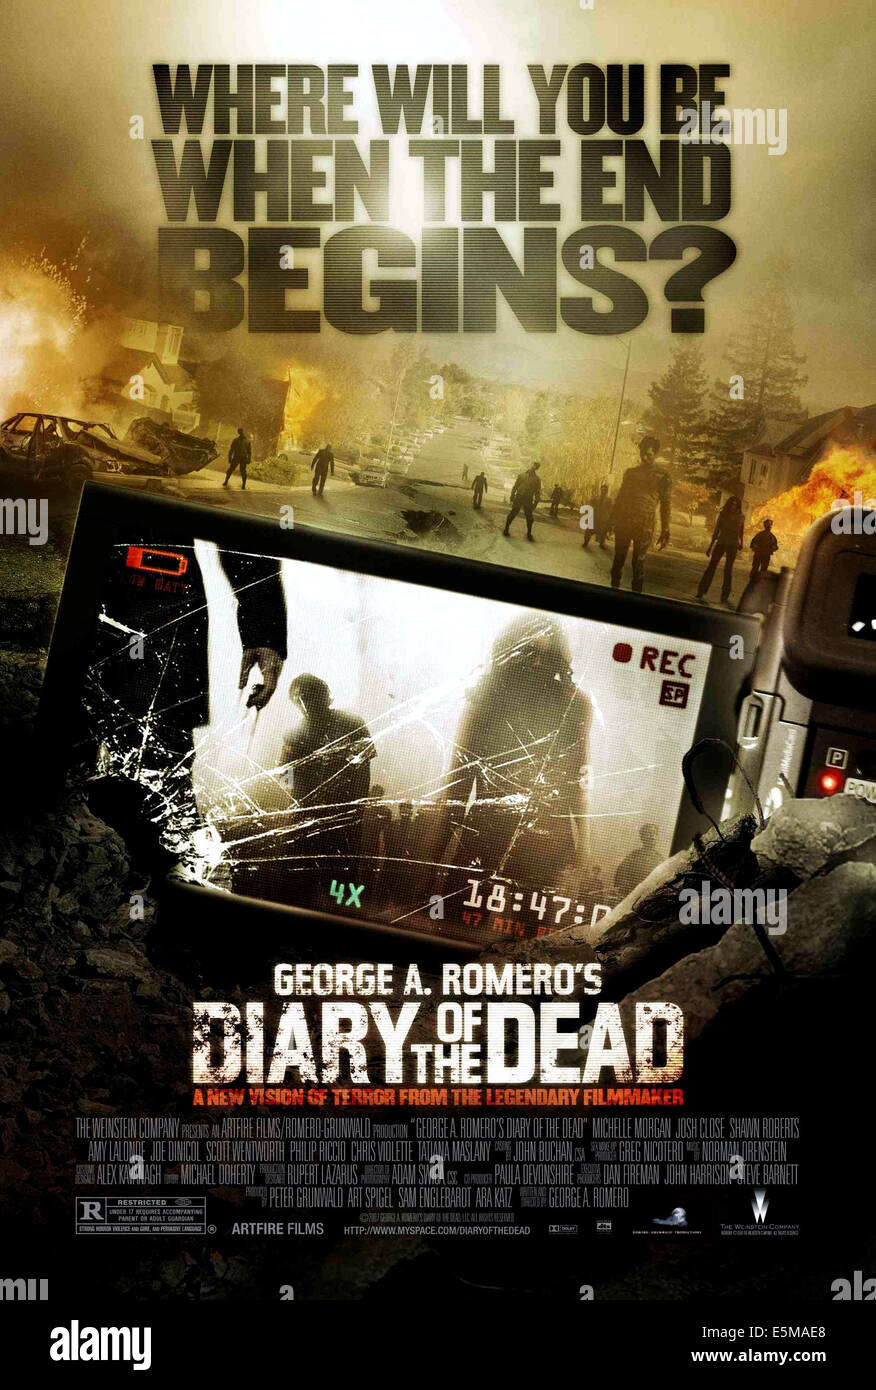 DIARY OF THE DEAD, (aka GEORGE A. ROMERO'S DIARY OF THE DEAD), poster art, 2007. ©Weinstein Company/Courtesy Everett Collection Stock Photo